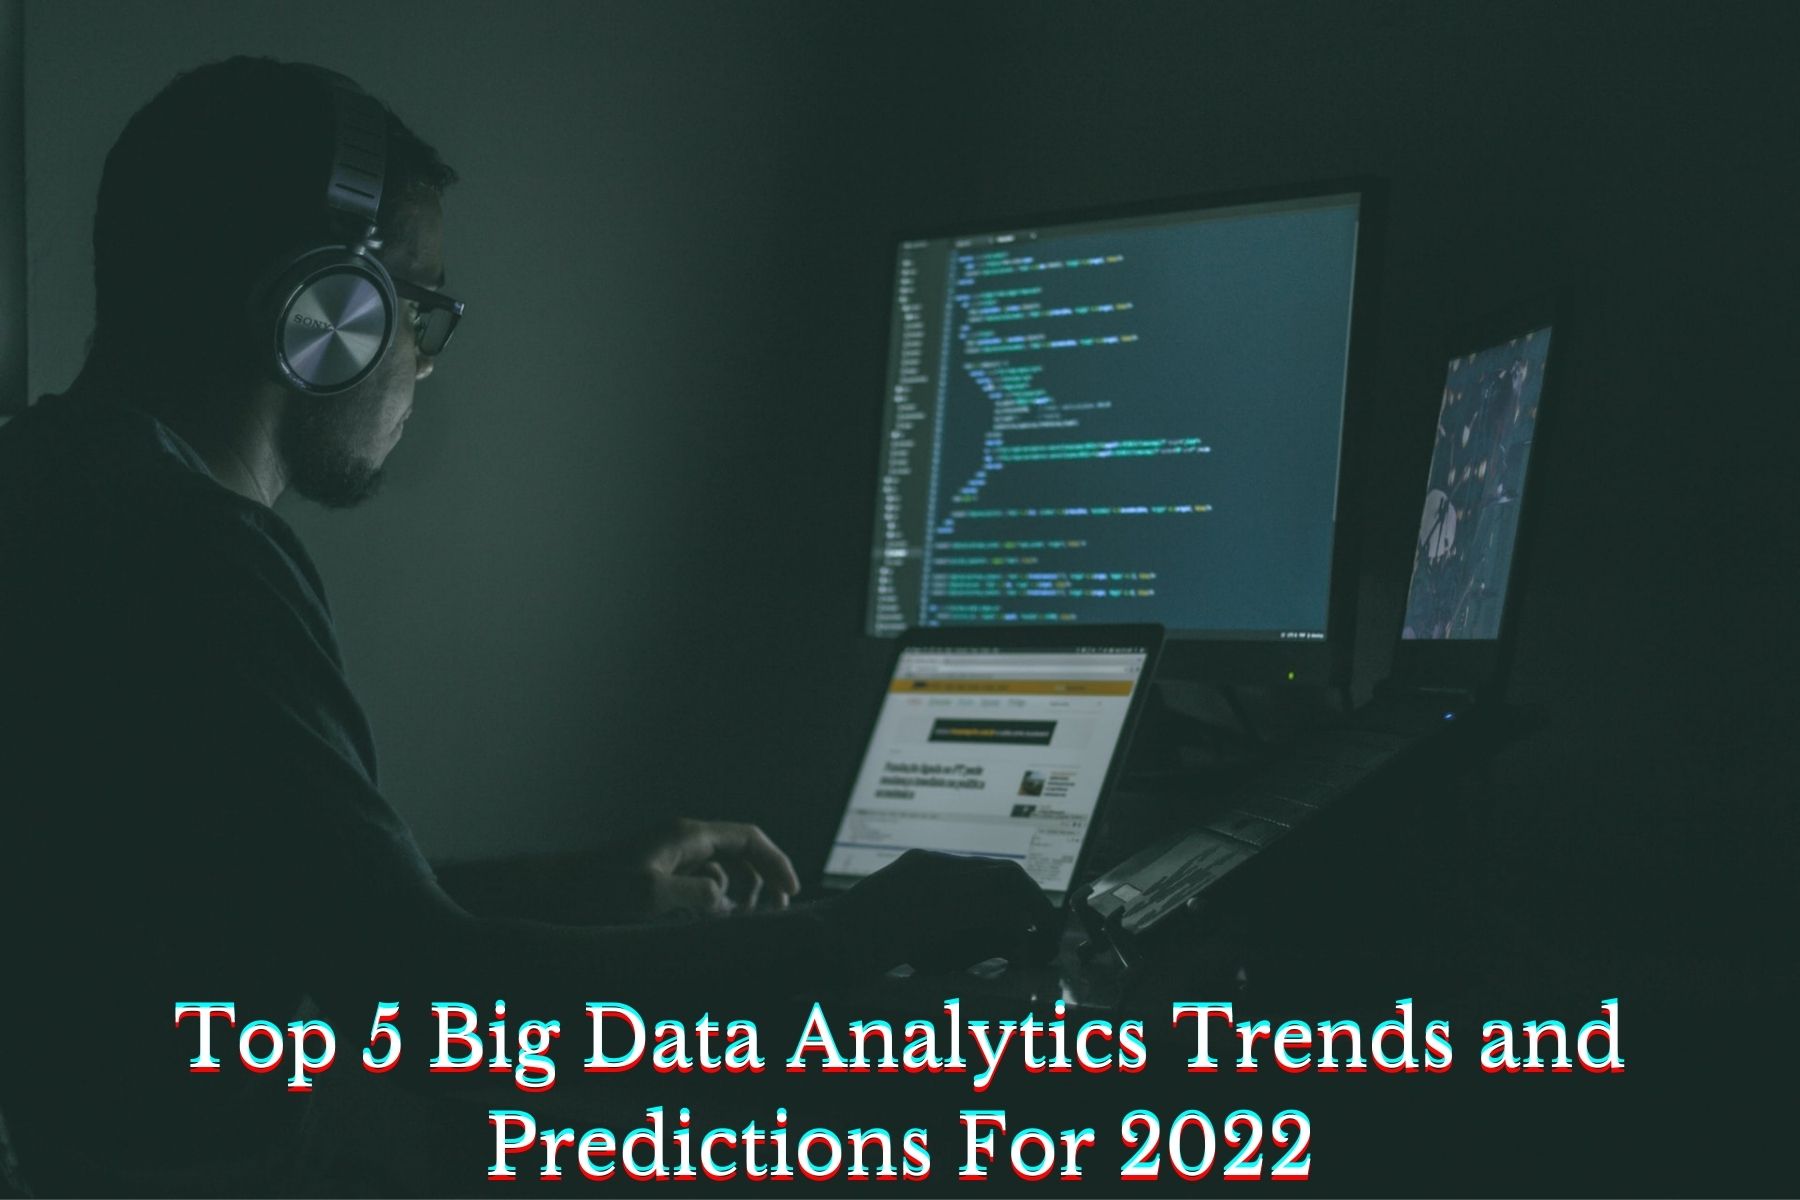 Top 5 Big Data Analytics Trends and Predictions For 2022